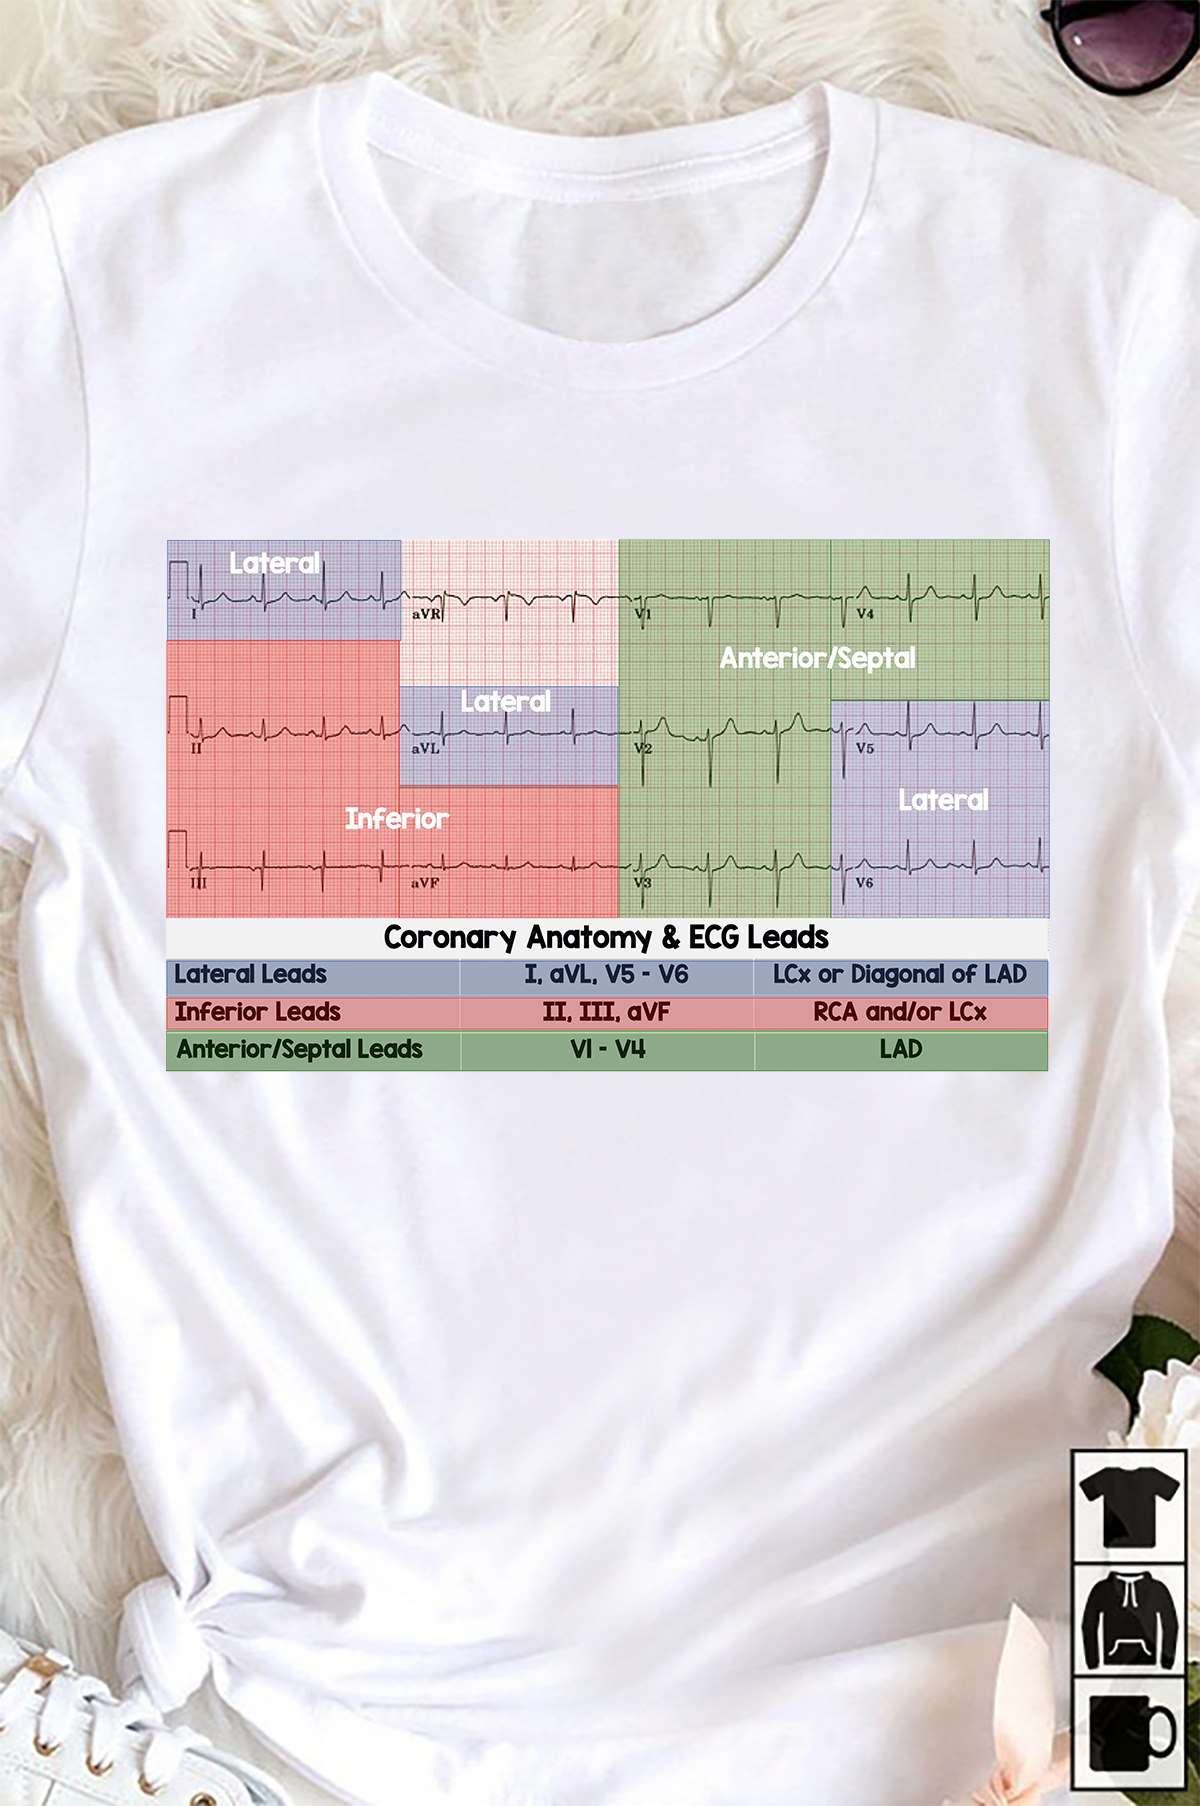 Coronary Anatomy and ECG Leads - Lateral Leads, Inferior Leads, Anterior Septal Leads